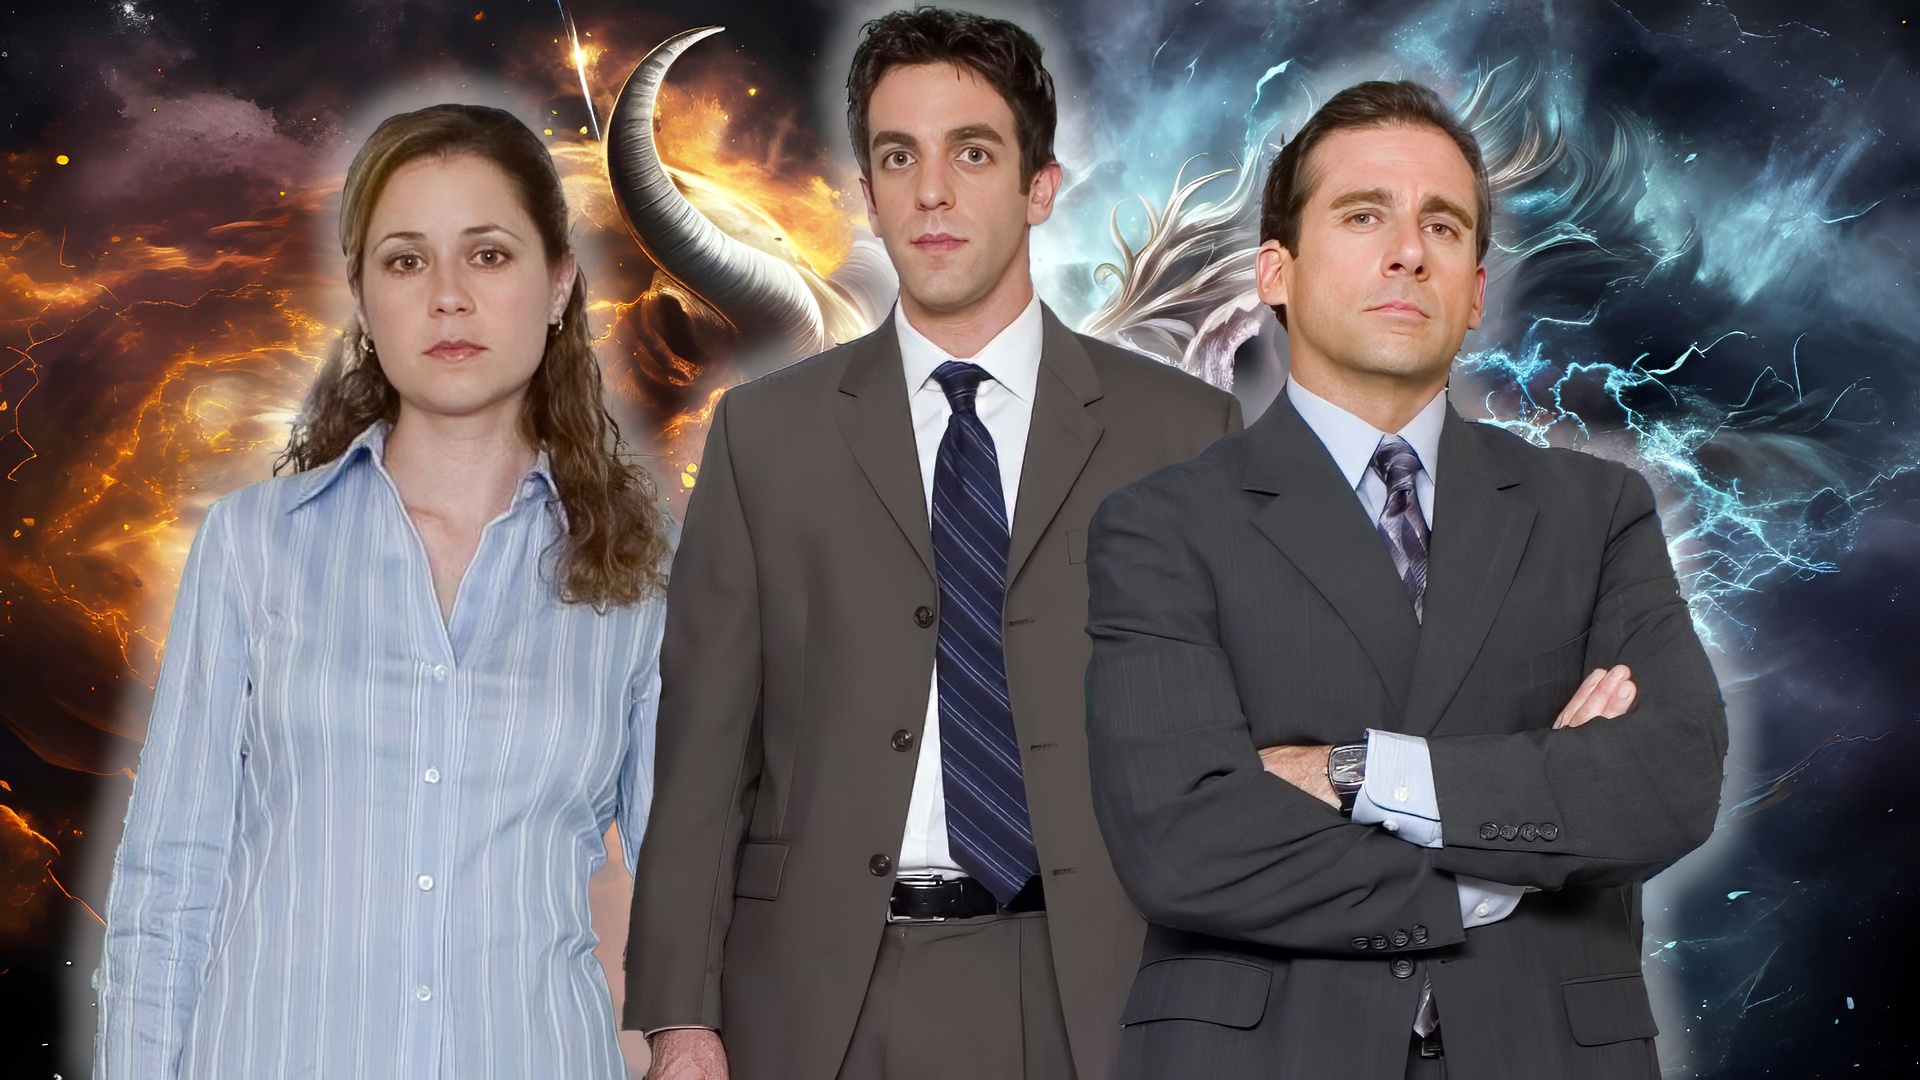 Find Out Which 'The Office' Employee You Are Based on Your Zodiac Sign